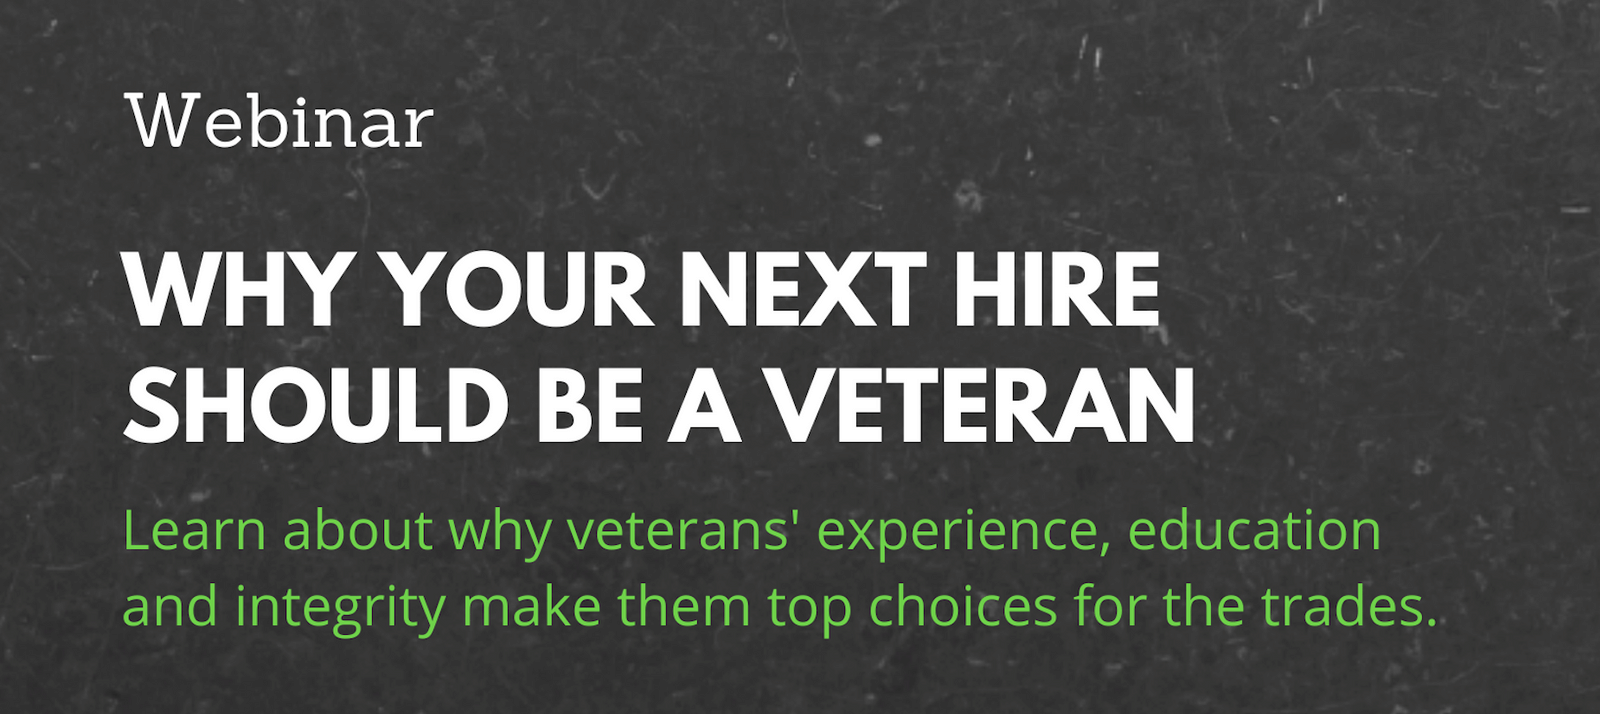 Why Your Next Hire Should Be A Veteran